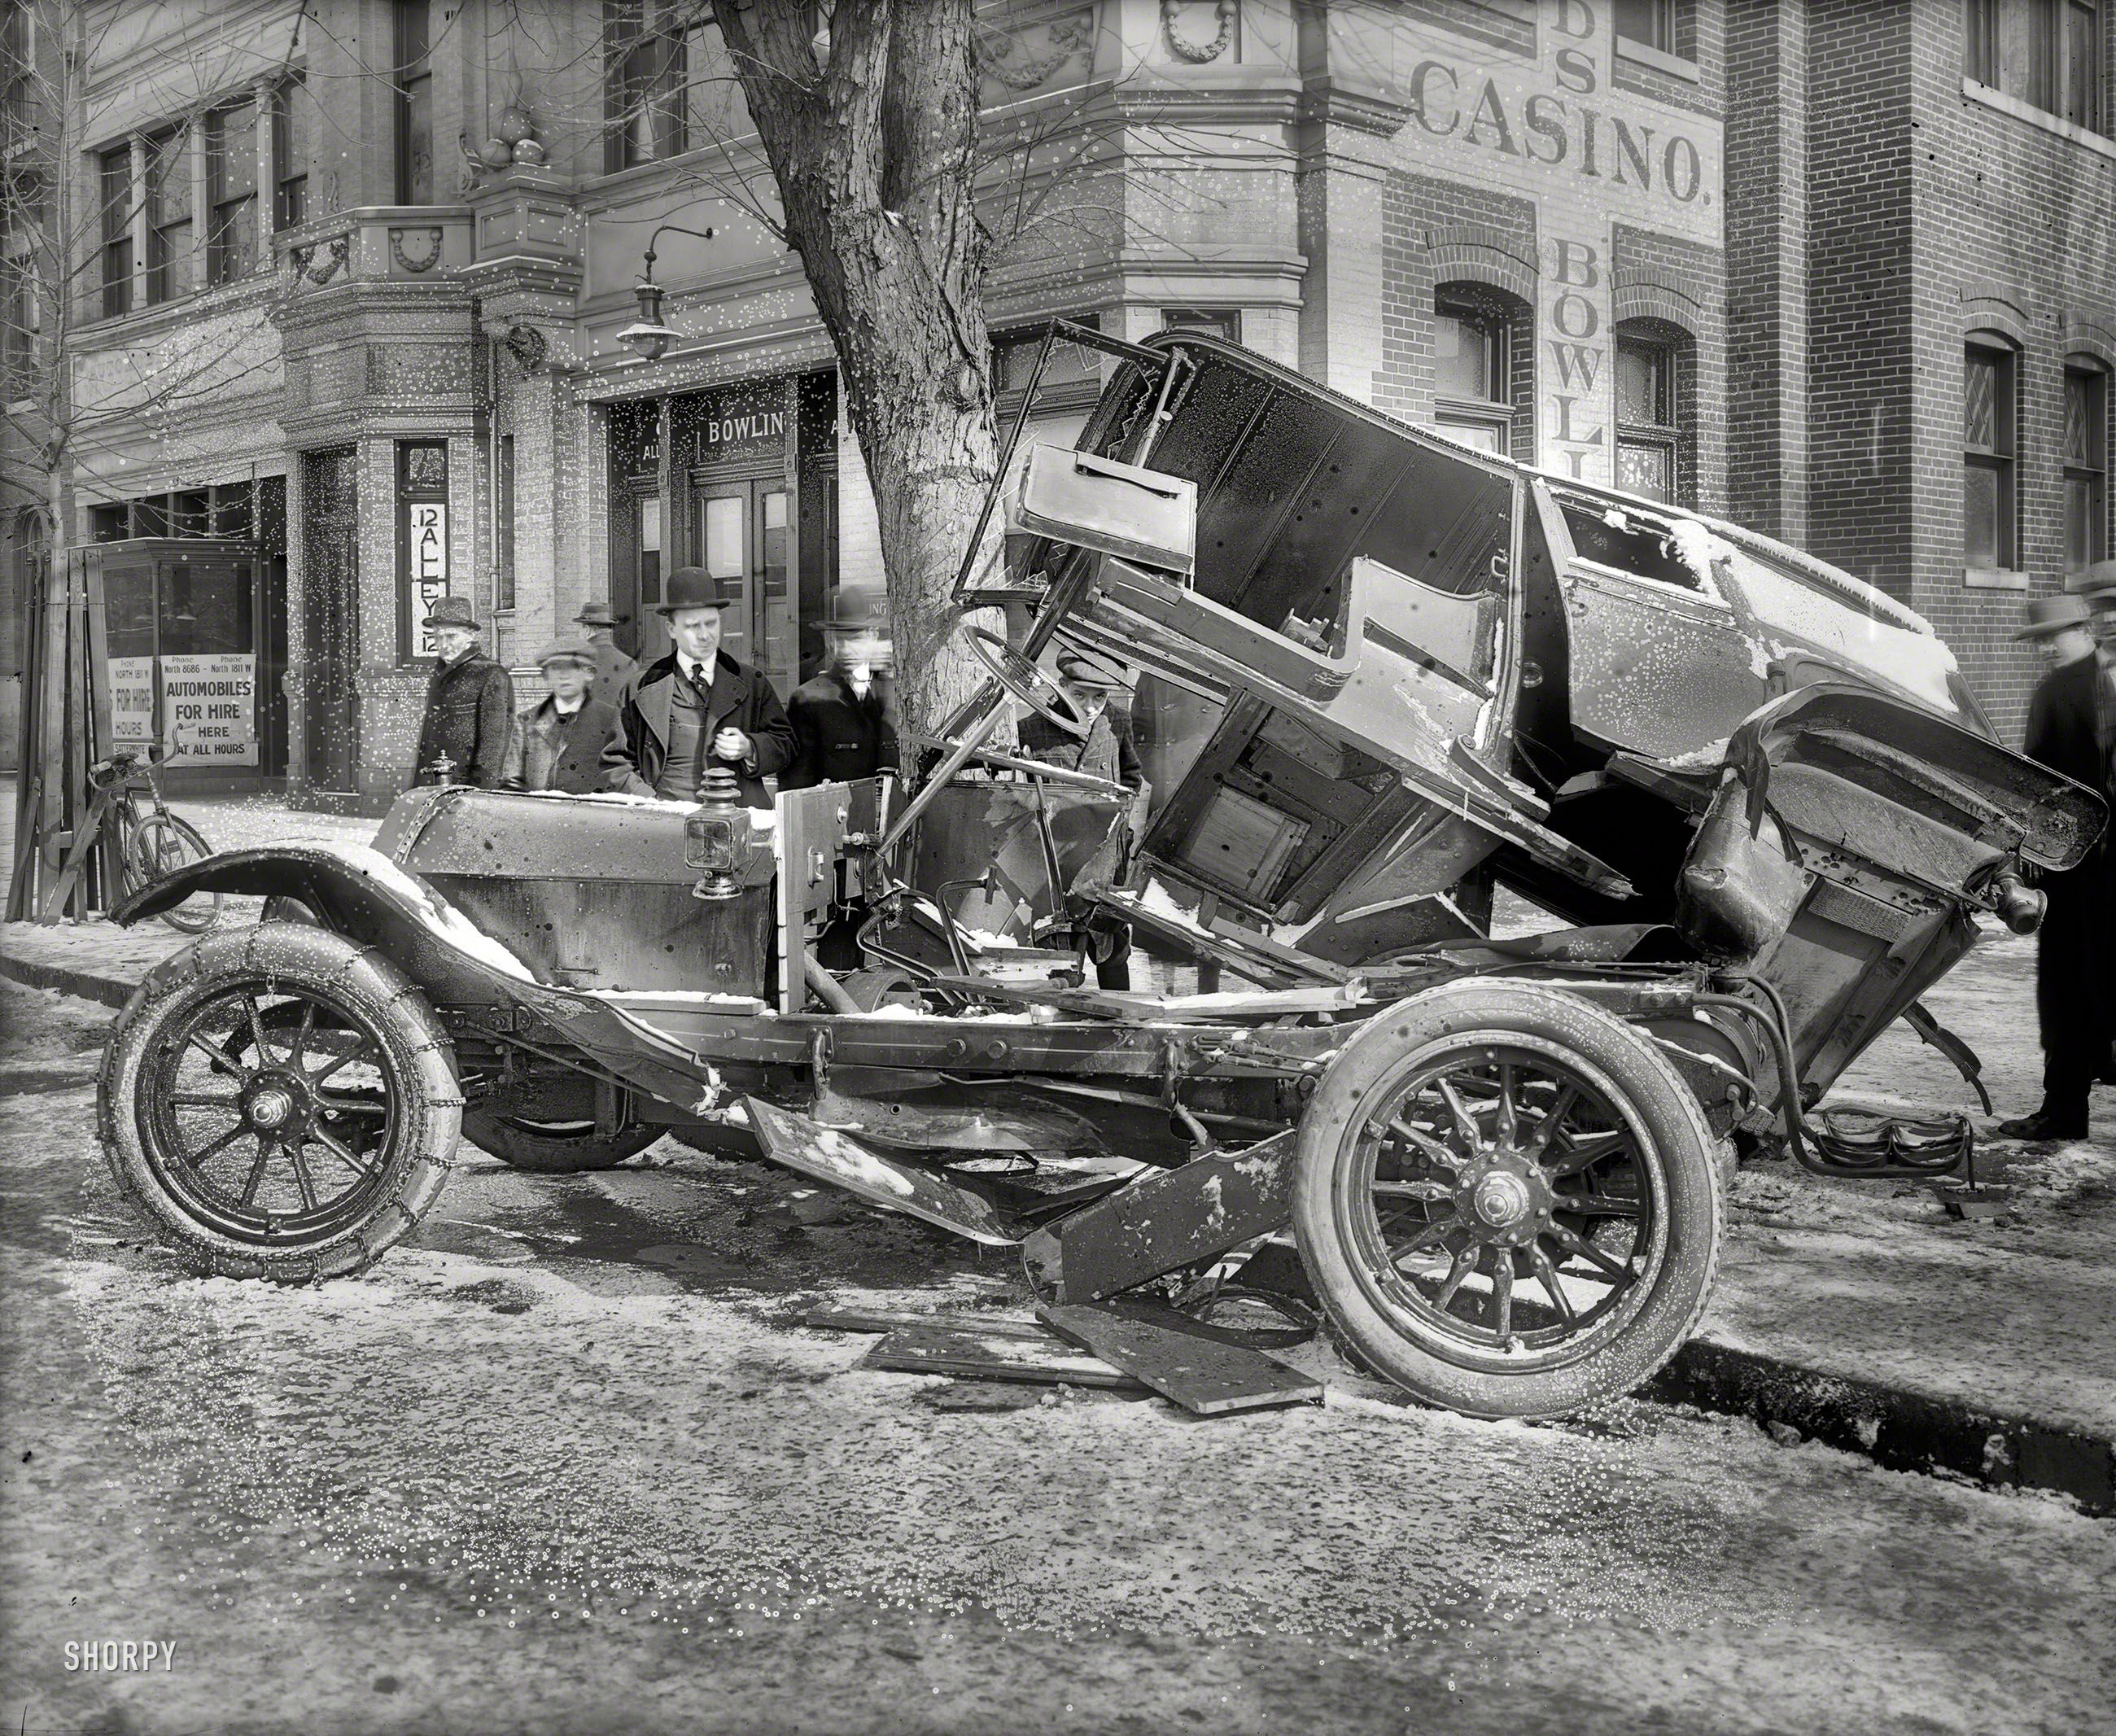 February 4, 1916. Washington, D.C. "Auto wreck at 14th & T," under a light dusting of snow and mold. Continuing the thread of vehicular mayhem we started earlier today. National Photo Company Collection glass negative. View full size.